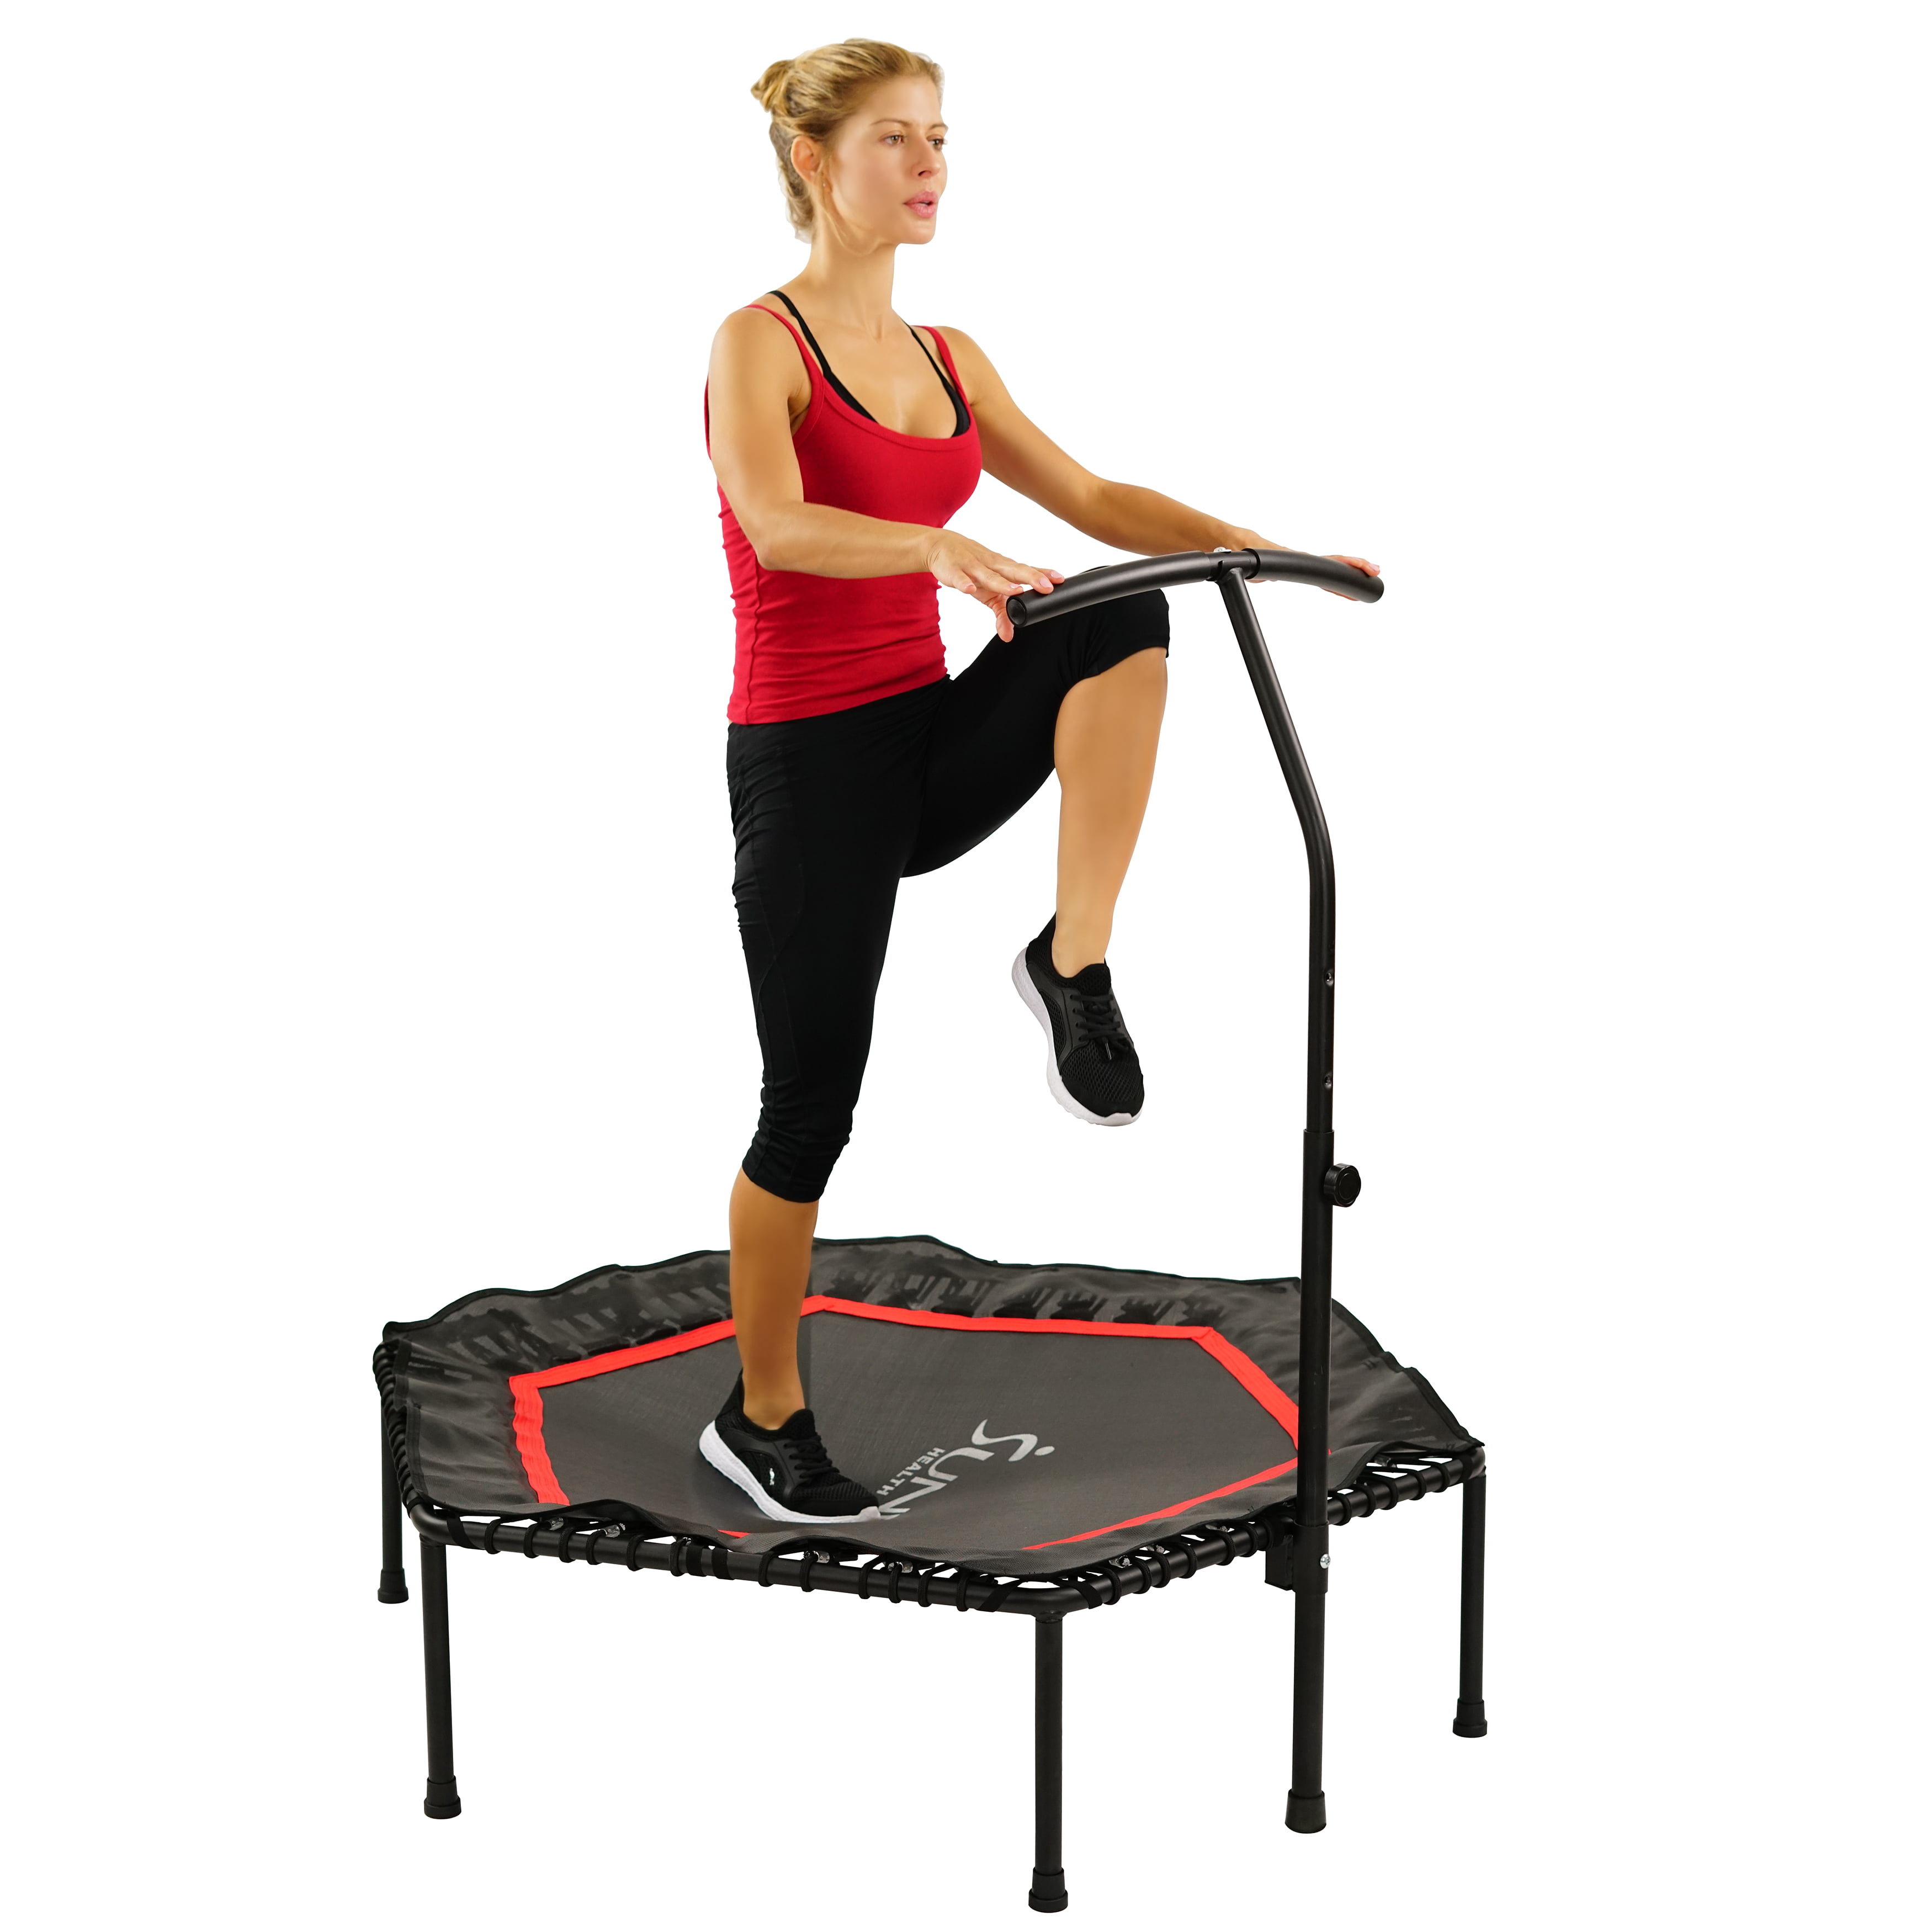 Sunny Health Exercise Handlebar, Adjustable with Fitness & Rebounder NO. Fitness Mini 079 Indoor Trampoline